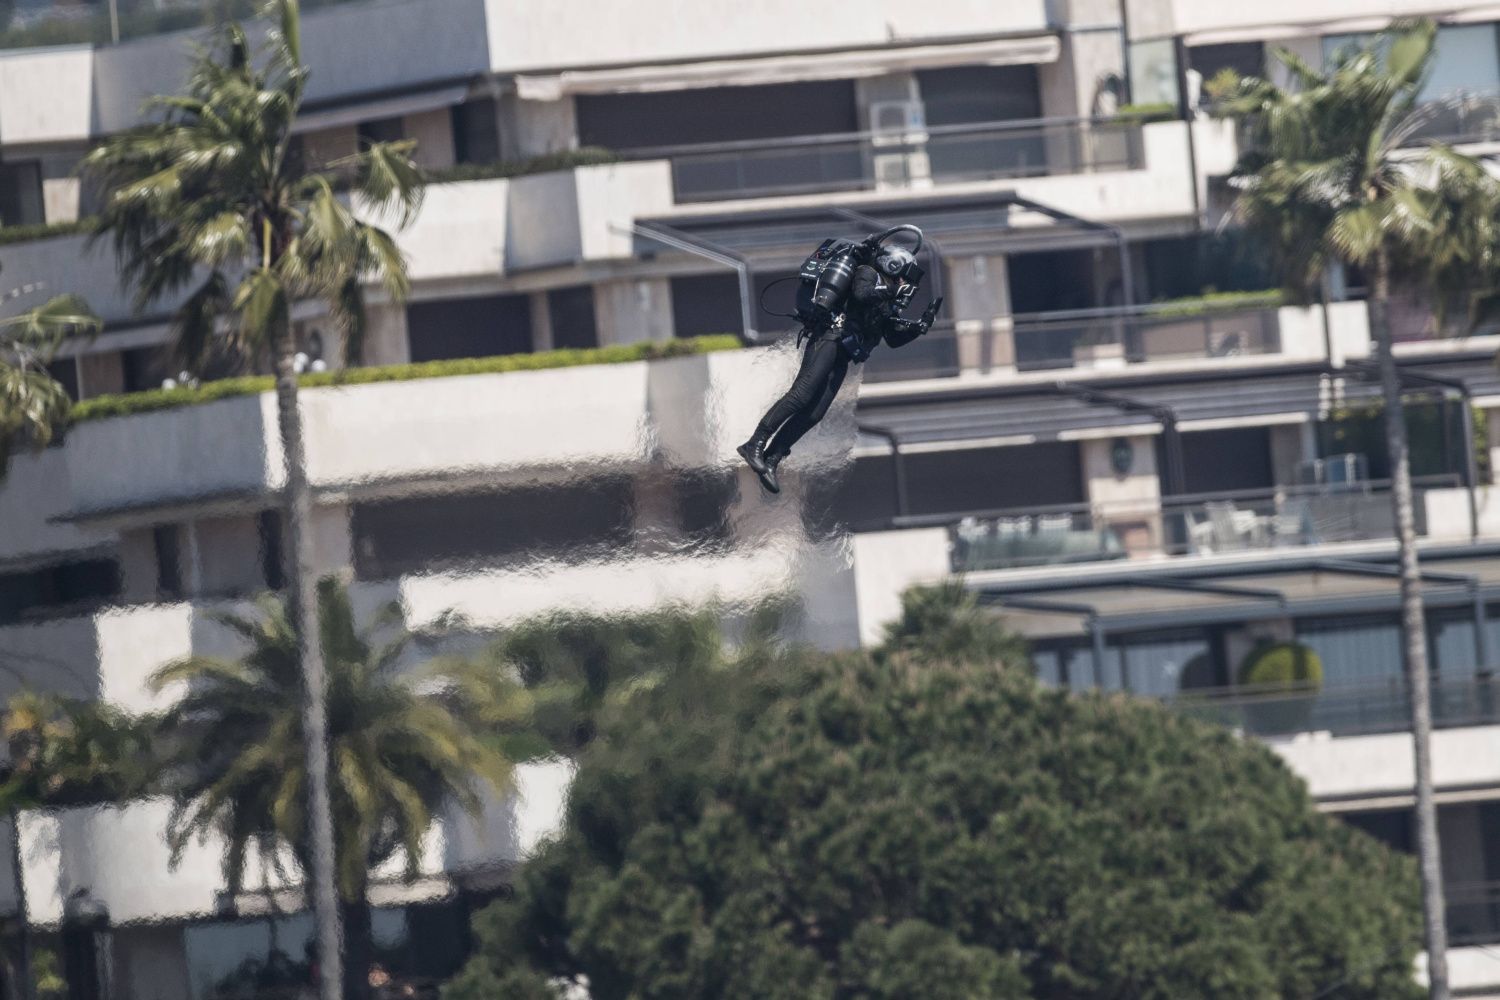 Red Bull Air Race Cannes 2018: Jet Pack Man